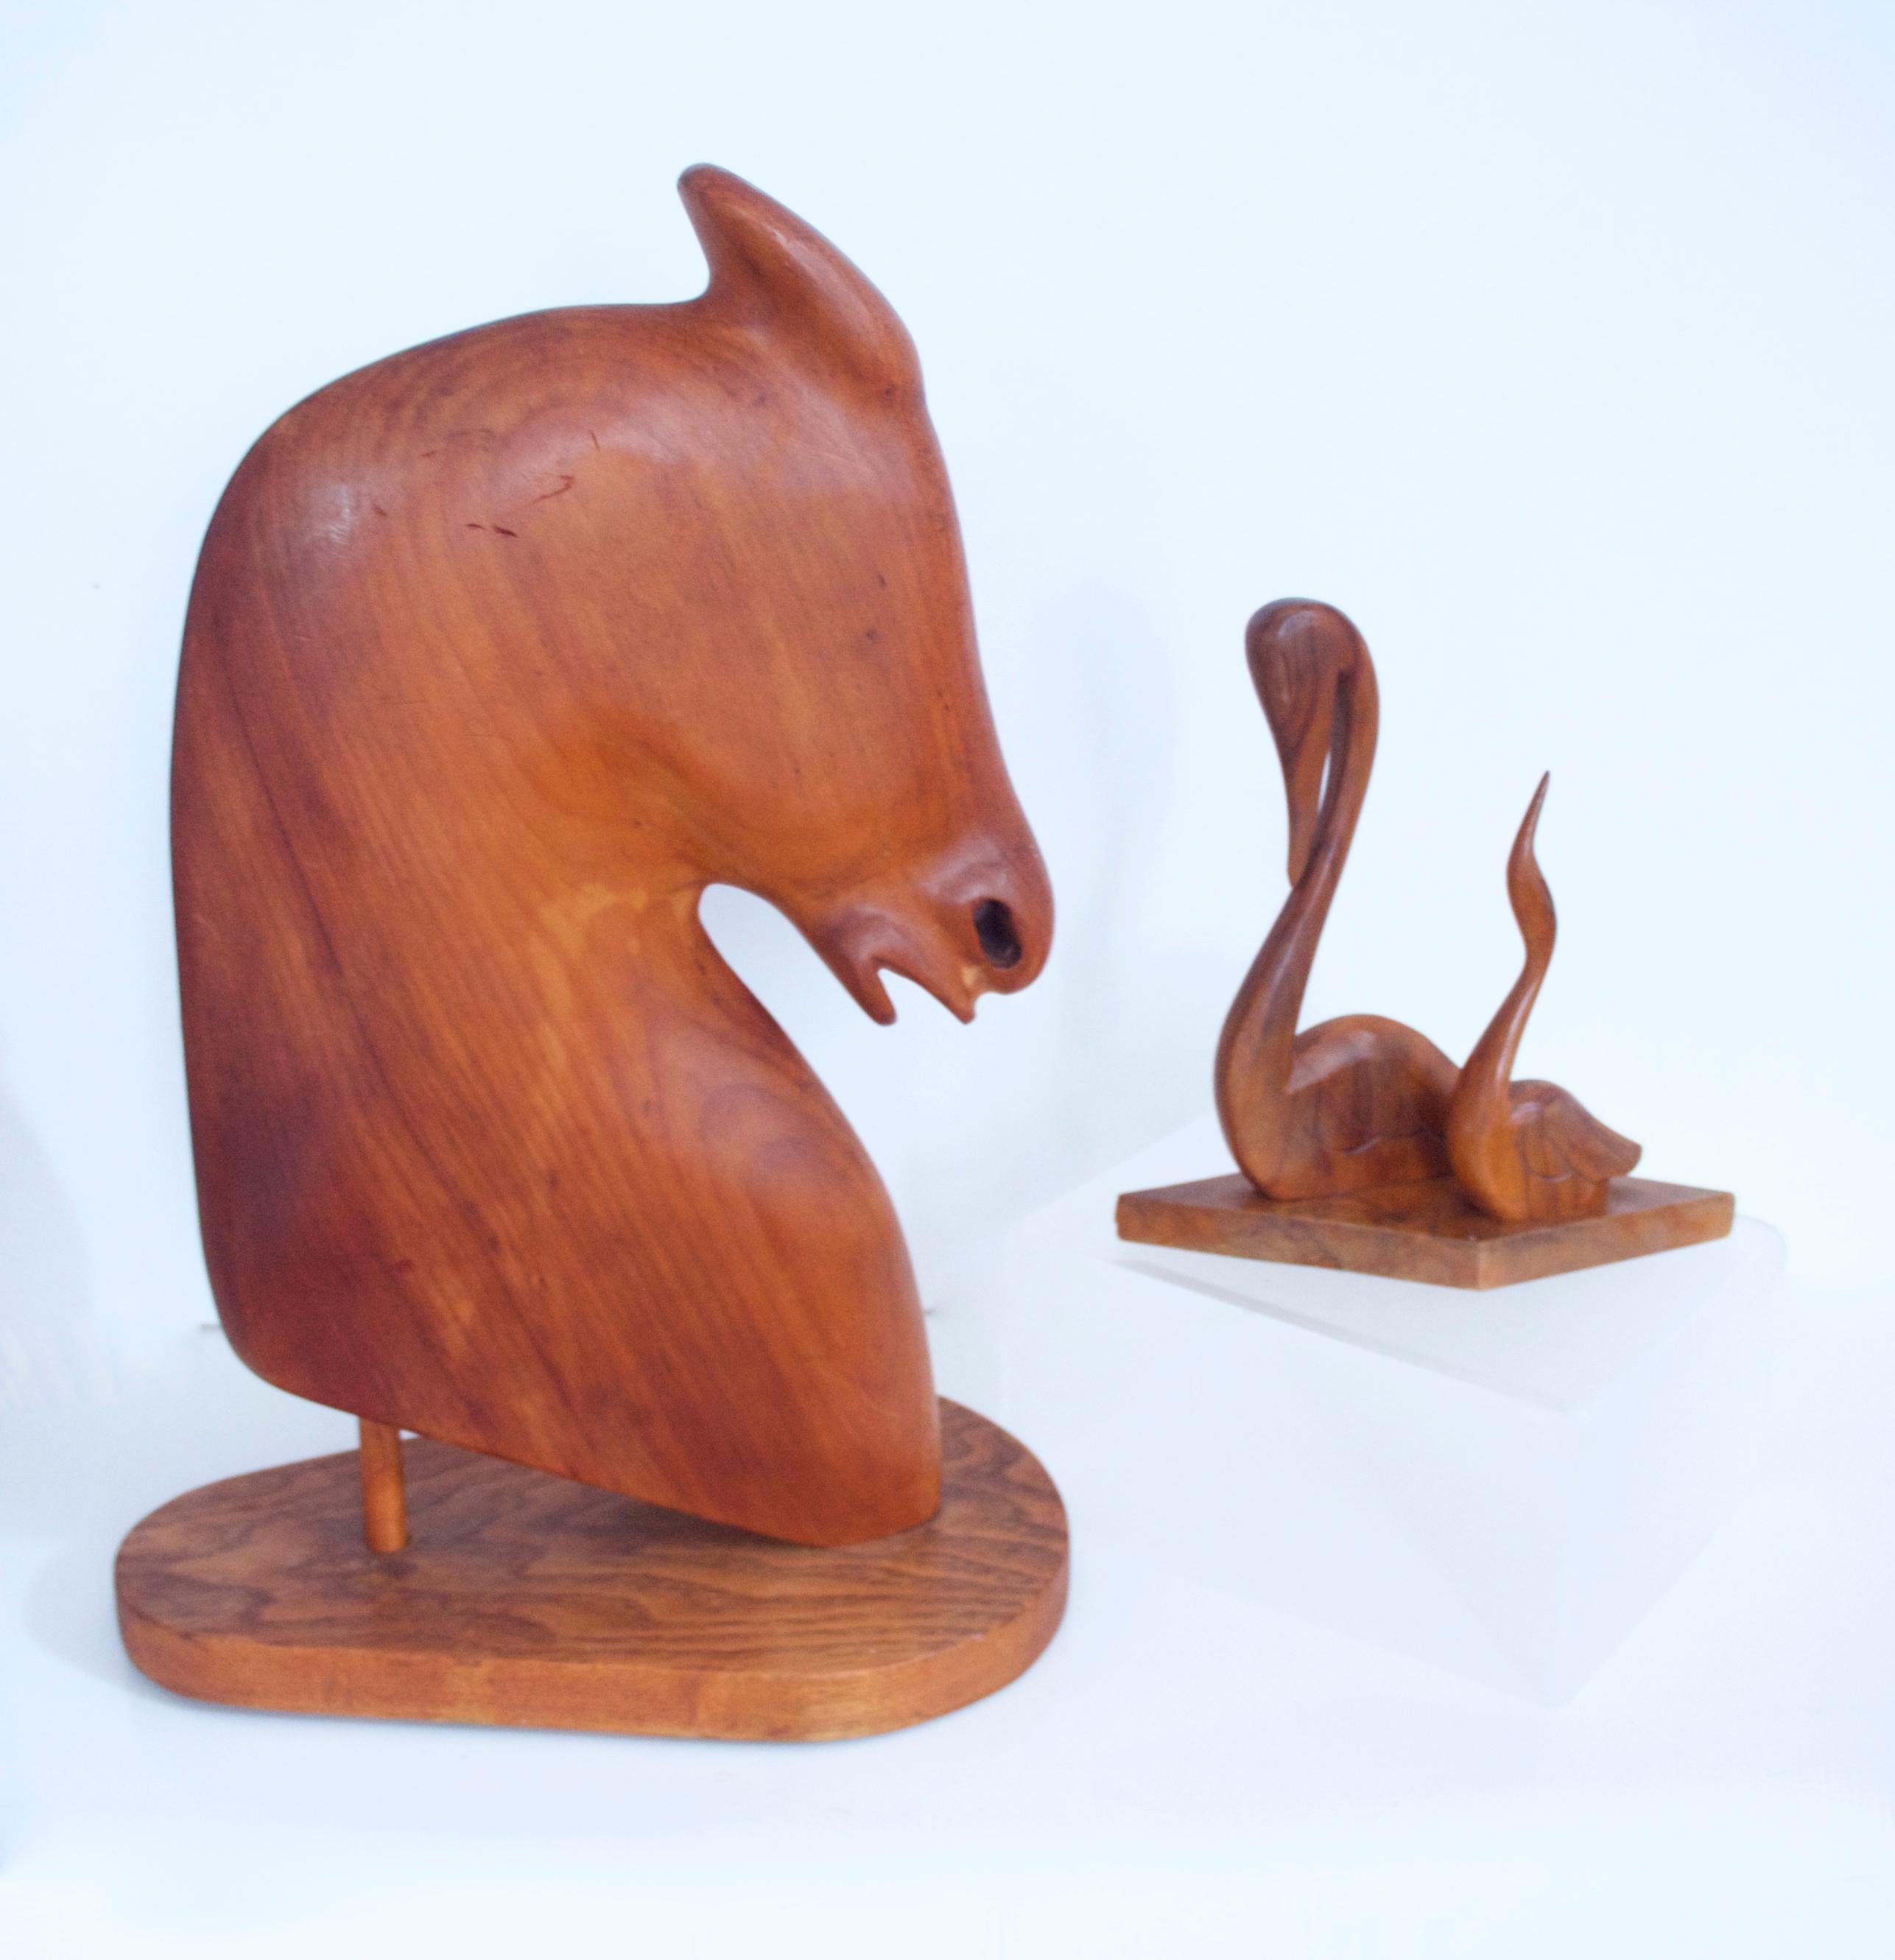 Scandinavian Modern Hand Carved Sculpture, Pair of Swans 1955 in Polished Teak For Sale 1